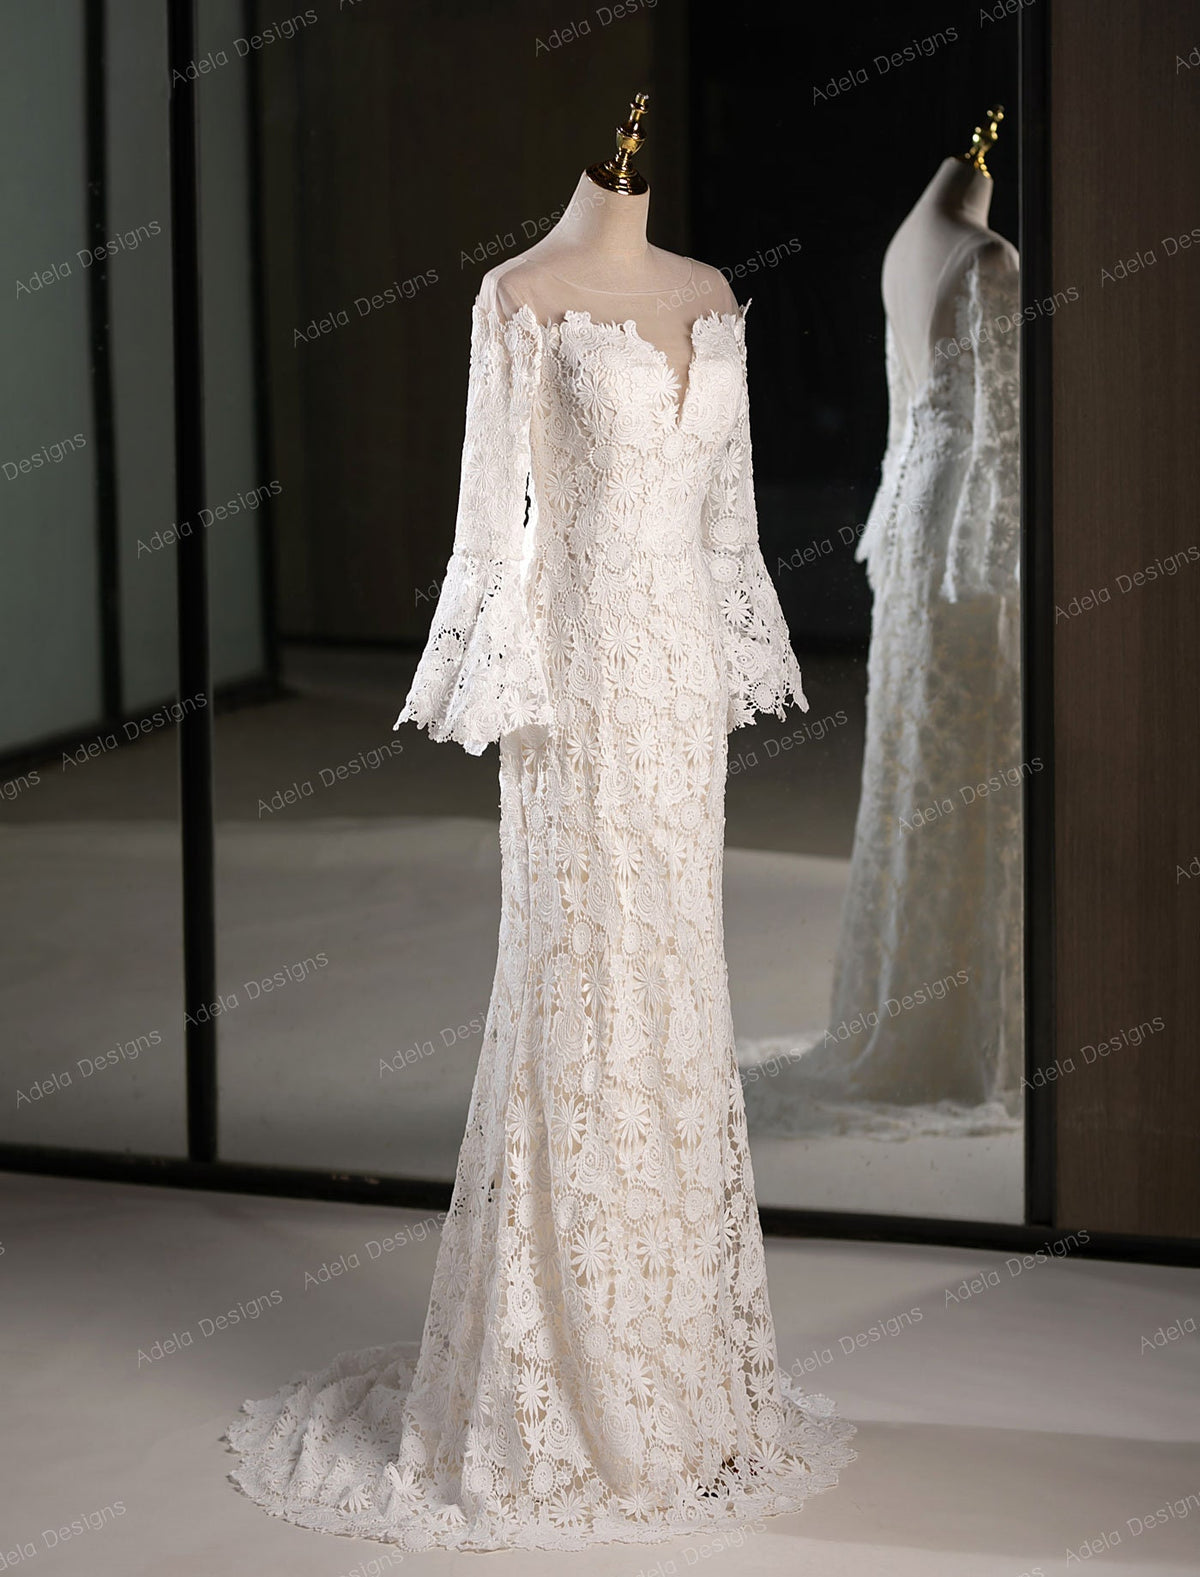 Elegant Boho Lace Long-Sleeve Wedding Dress with Floral Patterns and Flared Cuffs Bell Sleeve Fit and Flare Style